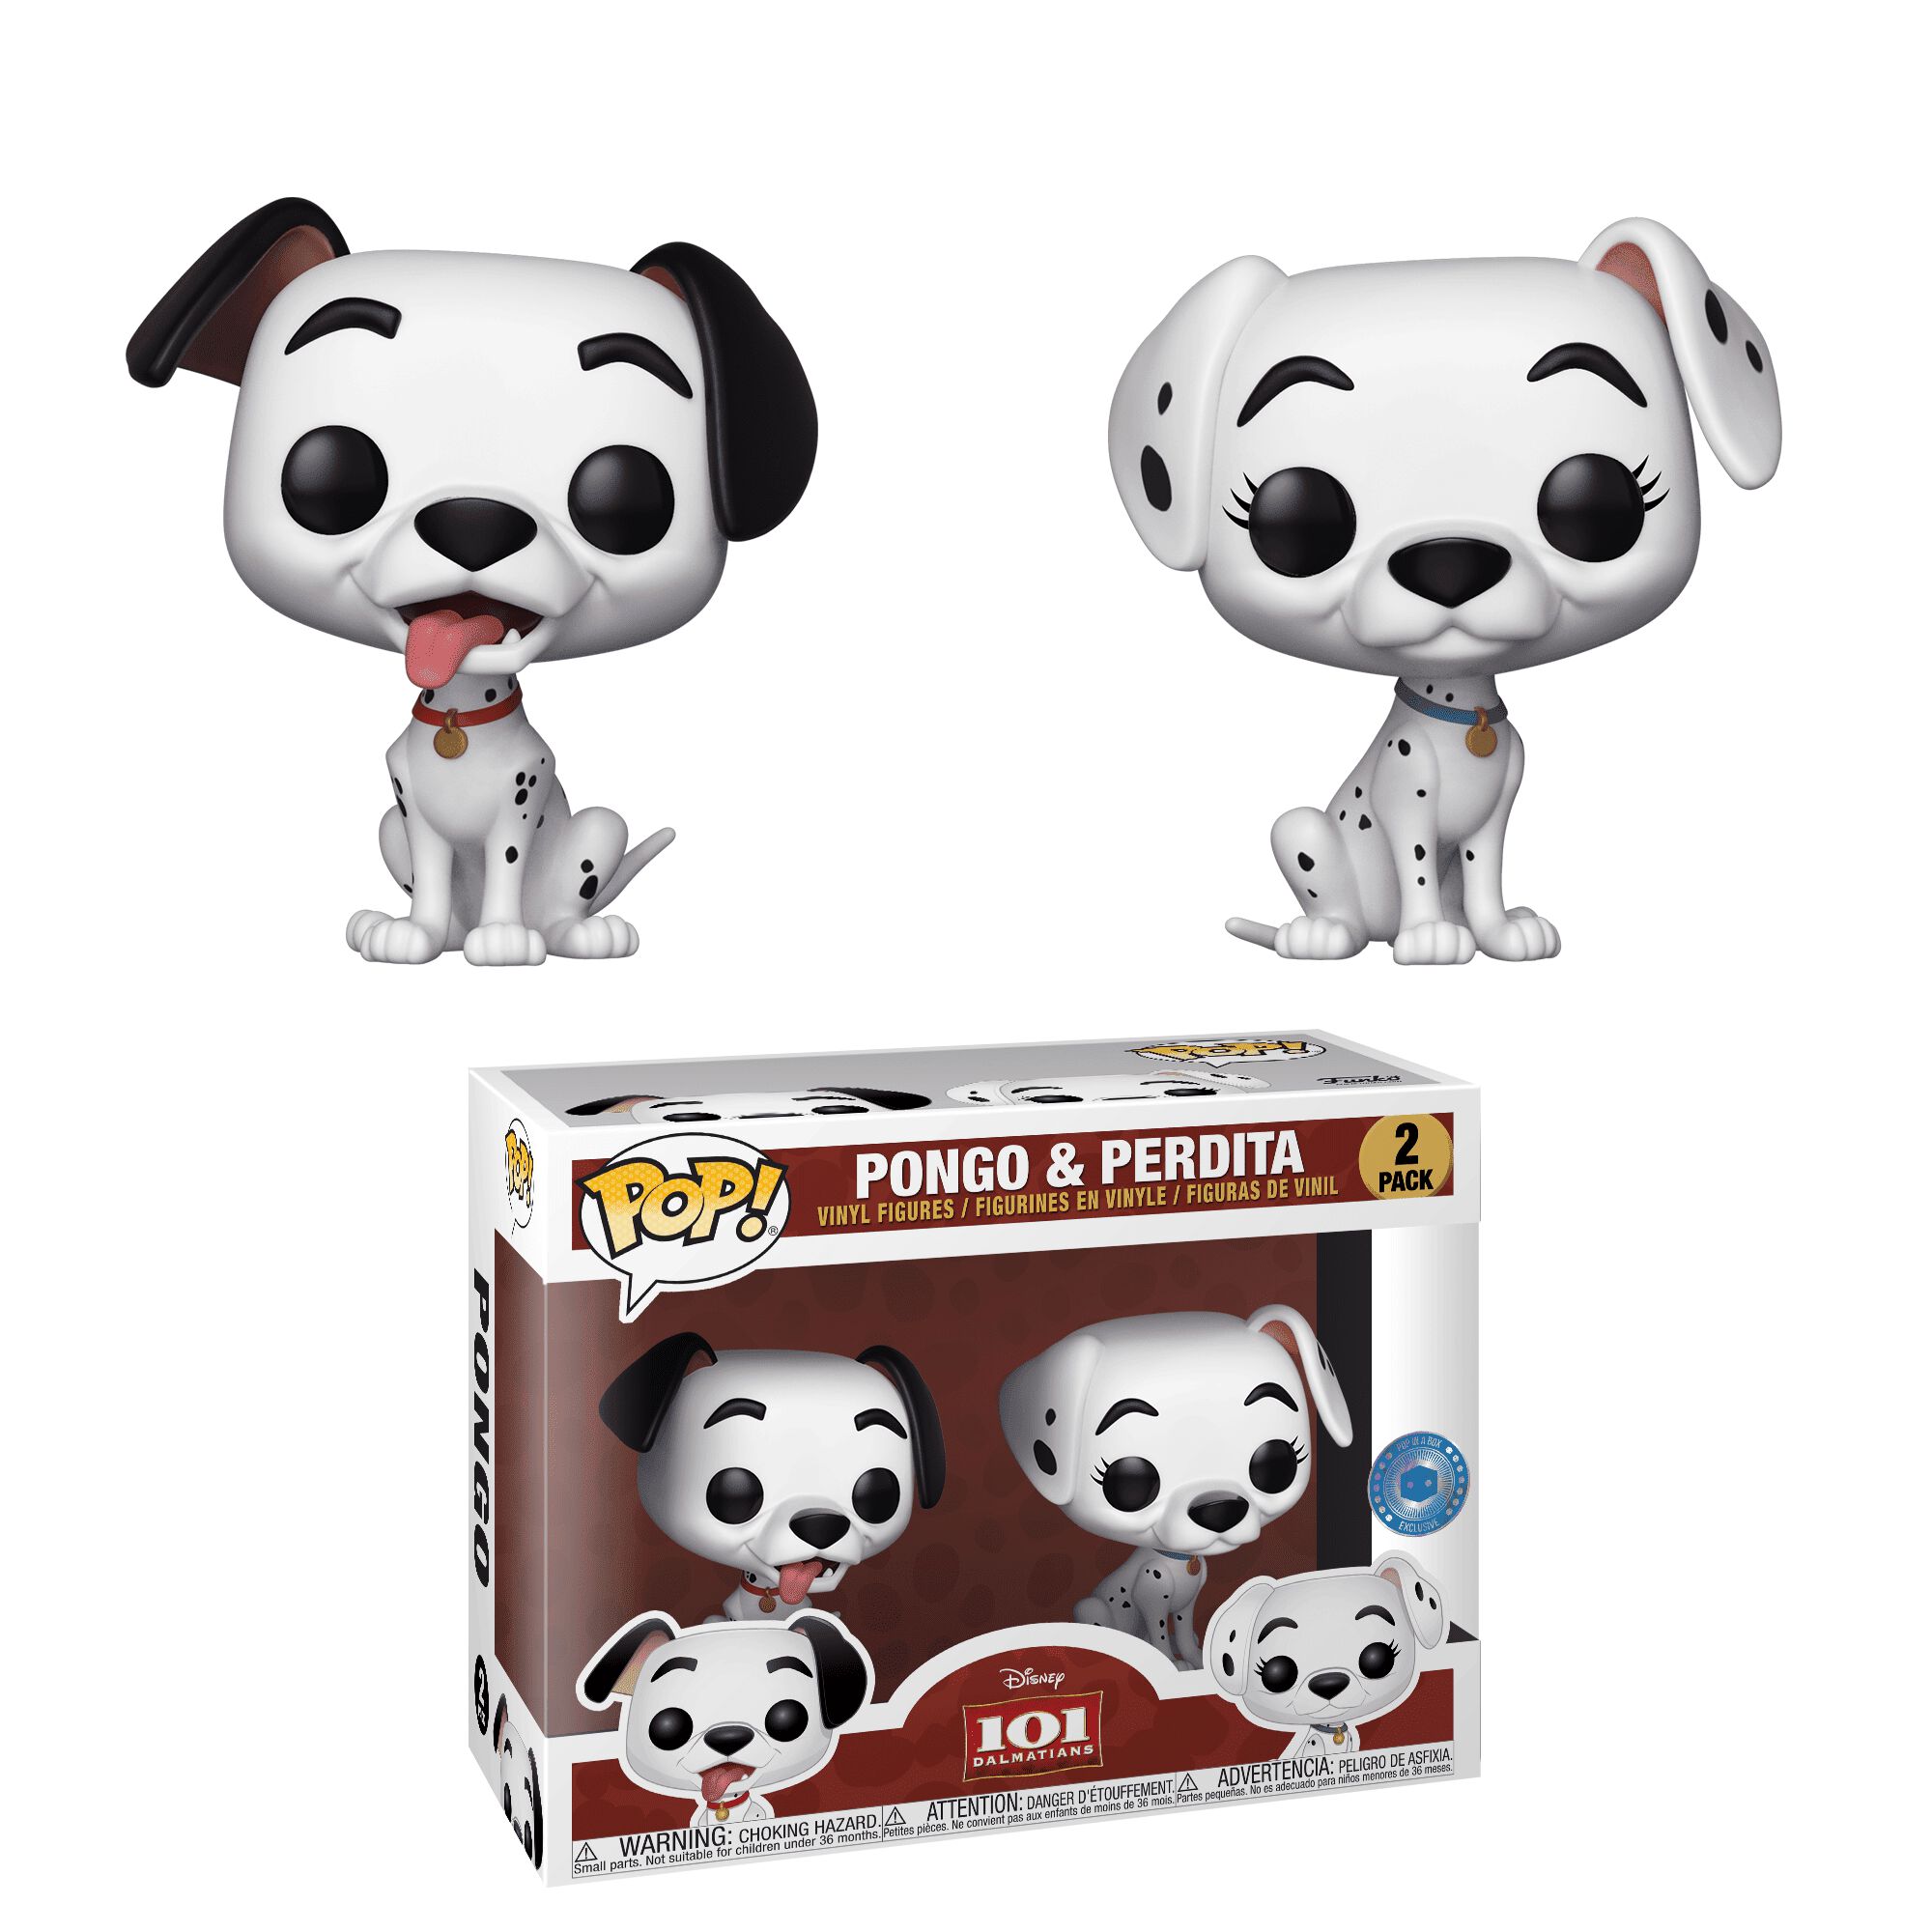 Available Now: Pop In A Box Exclusive Pongo and Perdita Pop! 2-Pack!